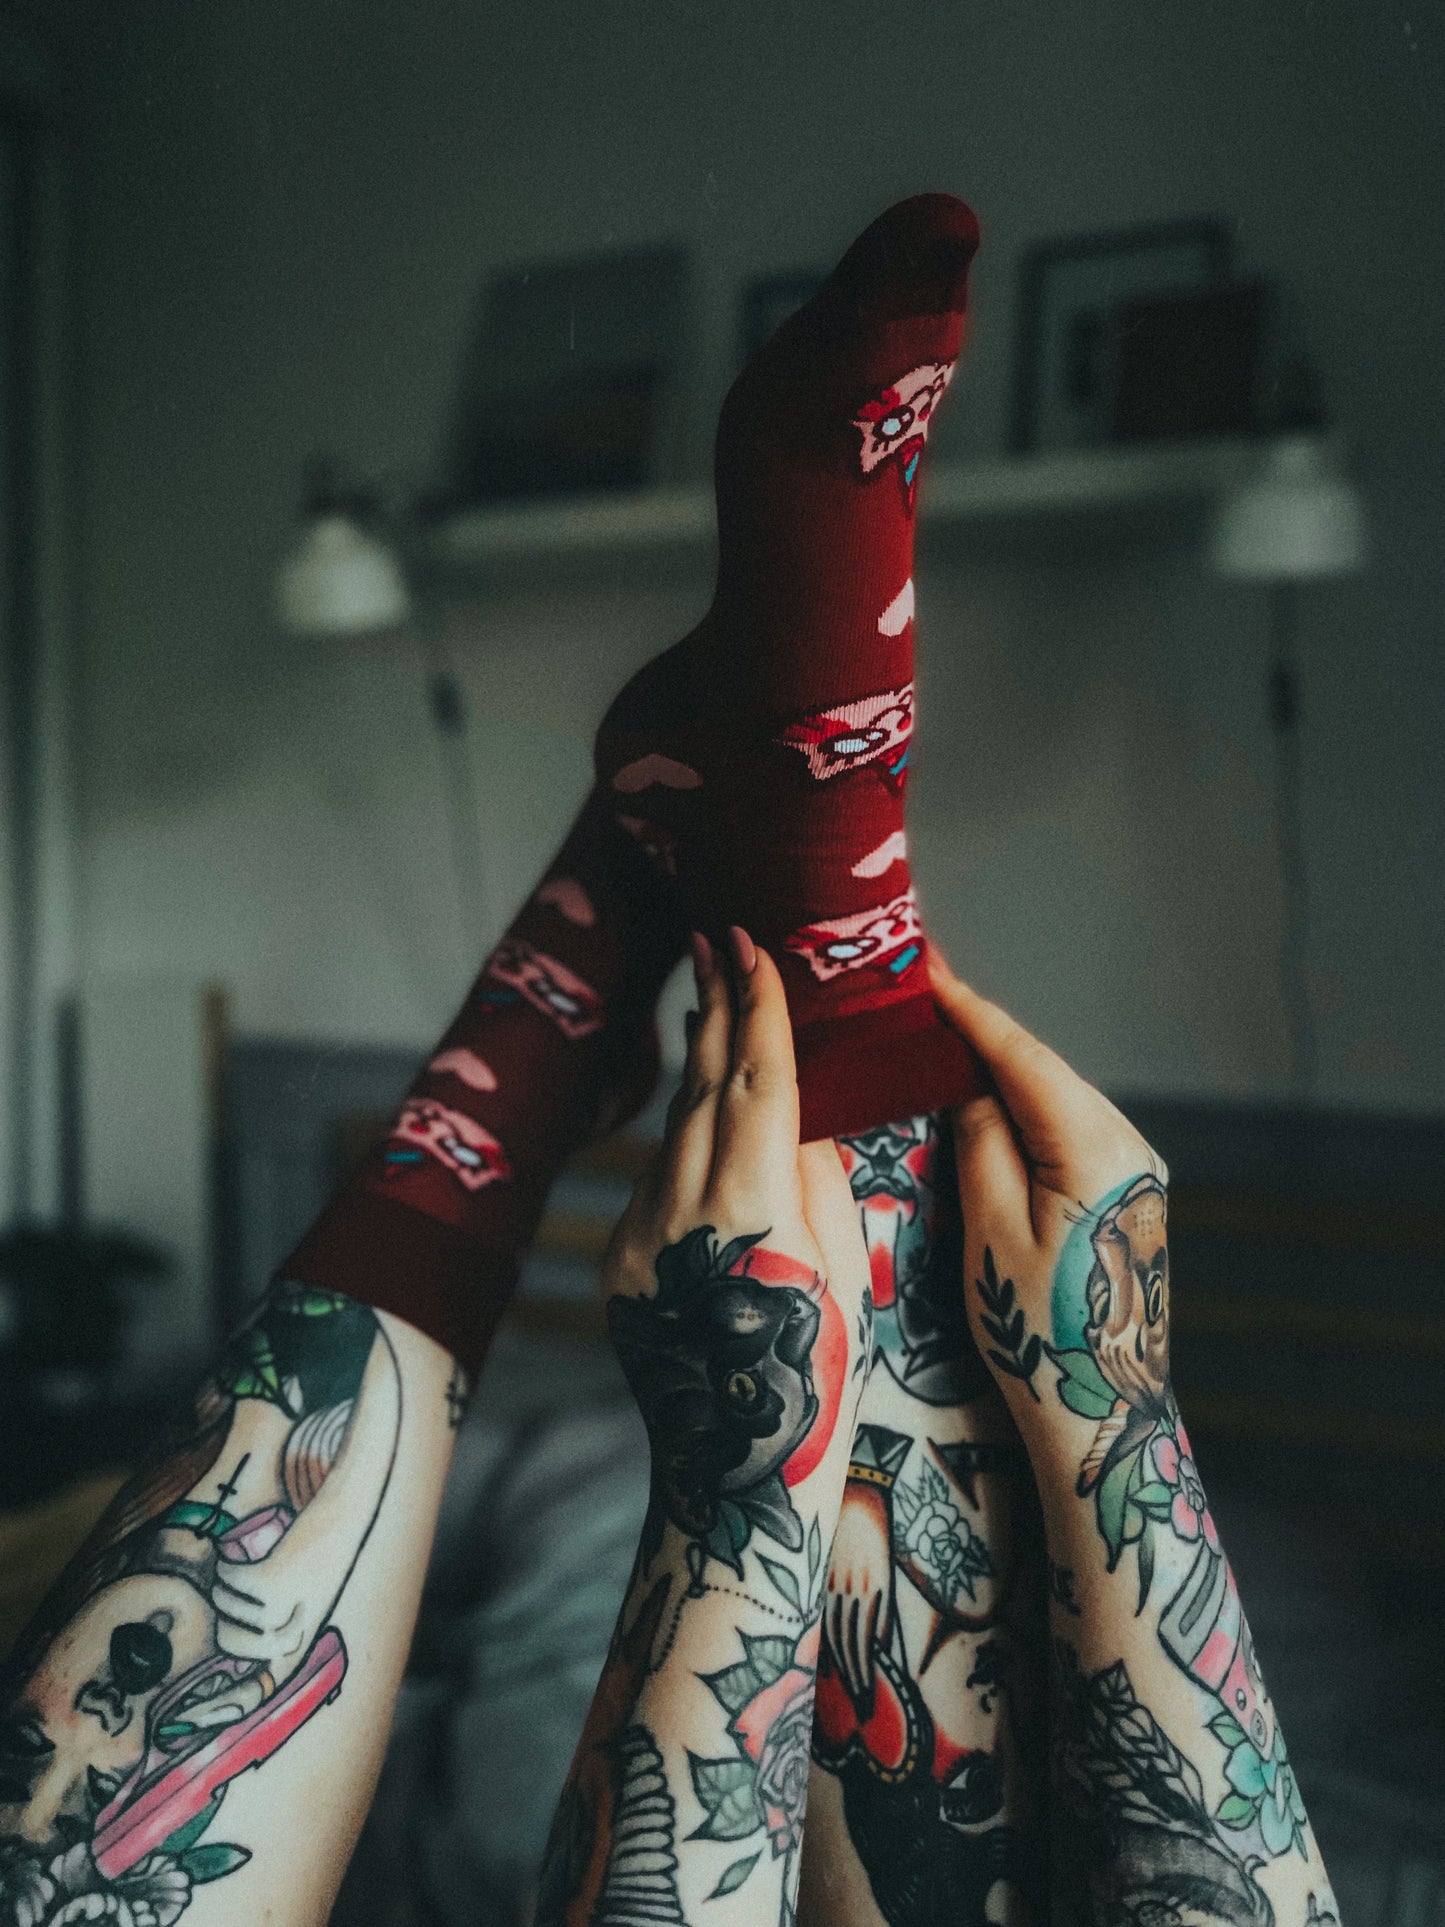 Tattooed legs raised with feet wearing red socks featuring a cartoon cat with a unicorn horn (Kotorozec) and hearts, set in a cozy indoor setting.